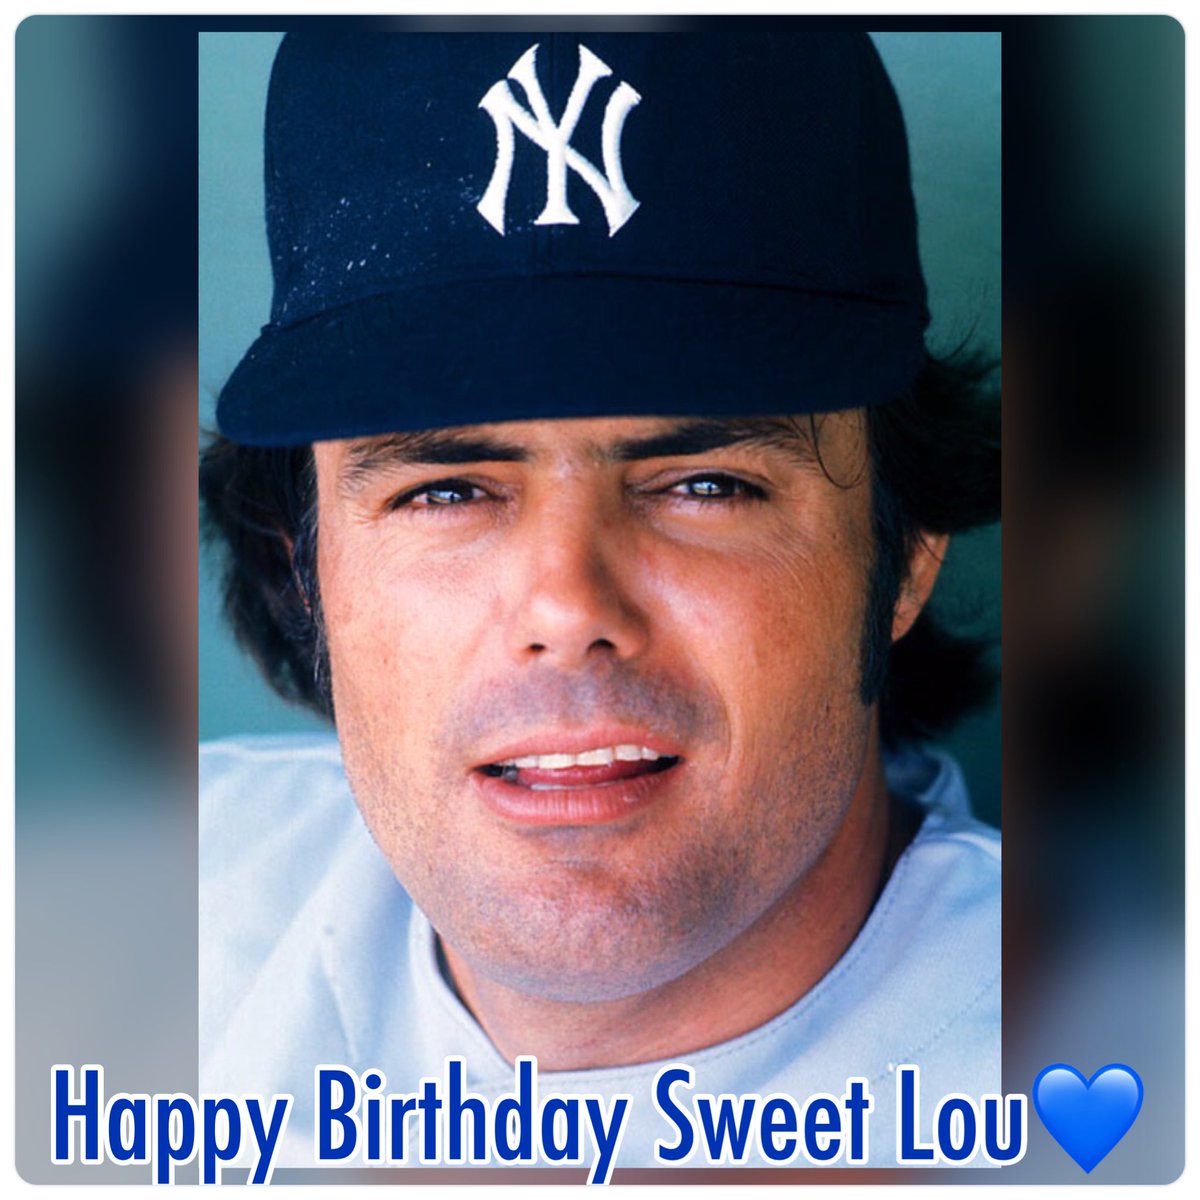 Happy Birthday #SweetLou ! You will always be a @Yankees in my eyes! #LouPiniella #14 #Outfielder #NYYankees #BestManagerinBaseball #Legend